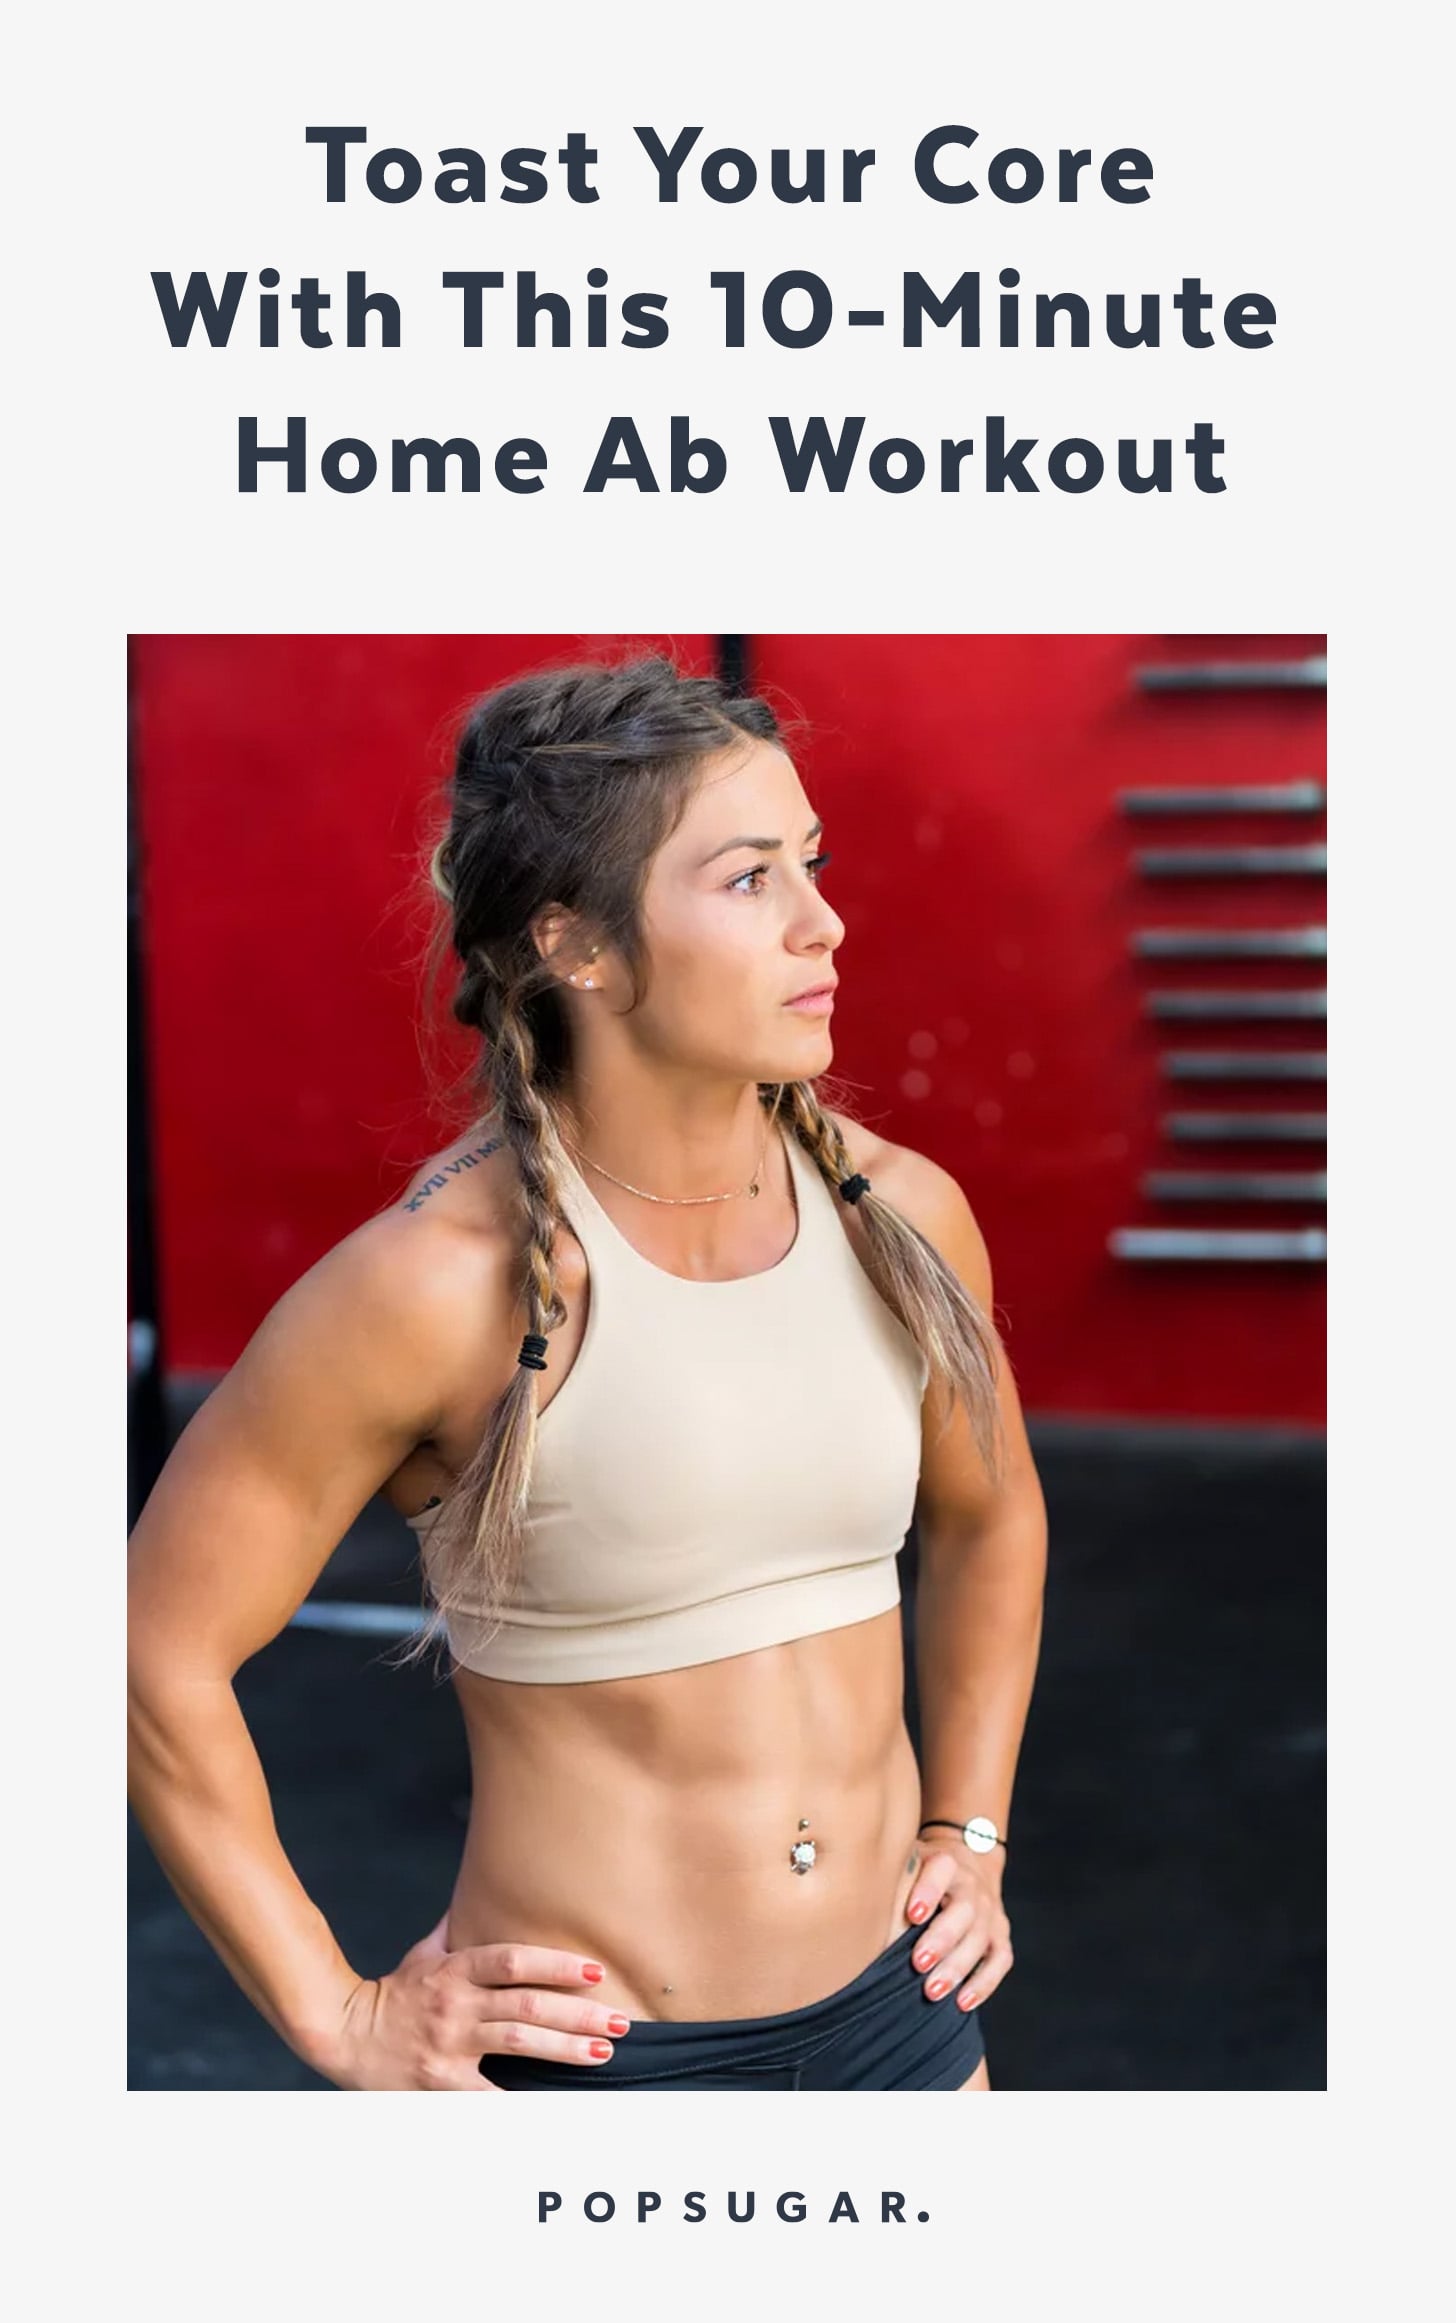 10-Minute Home Ab Workout